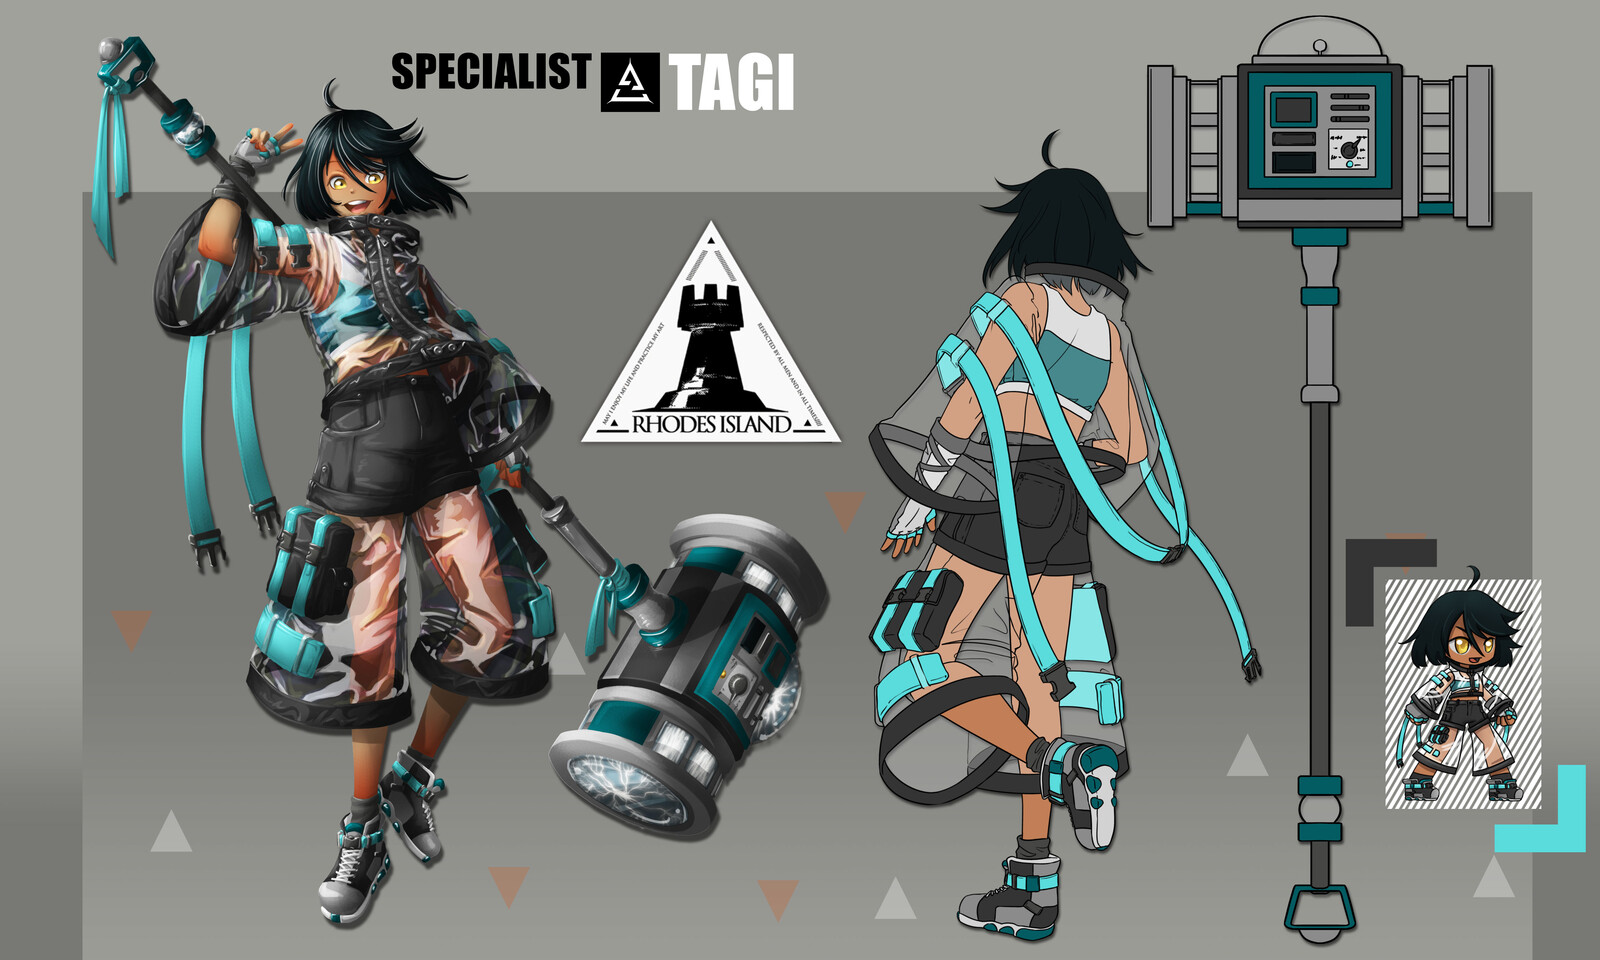 Character Sheet, includes main view, back view, weapon, and in-game character. 